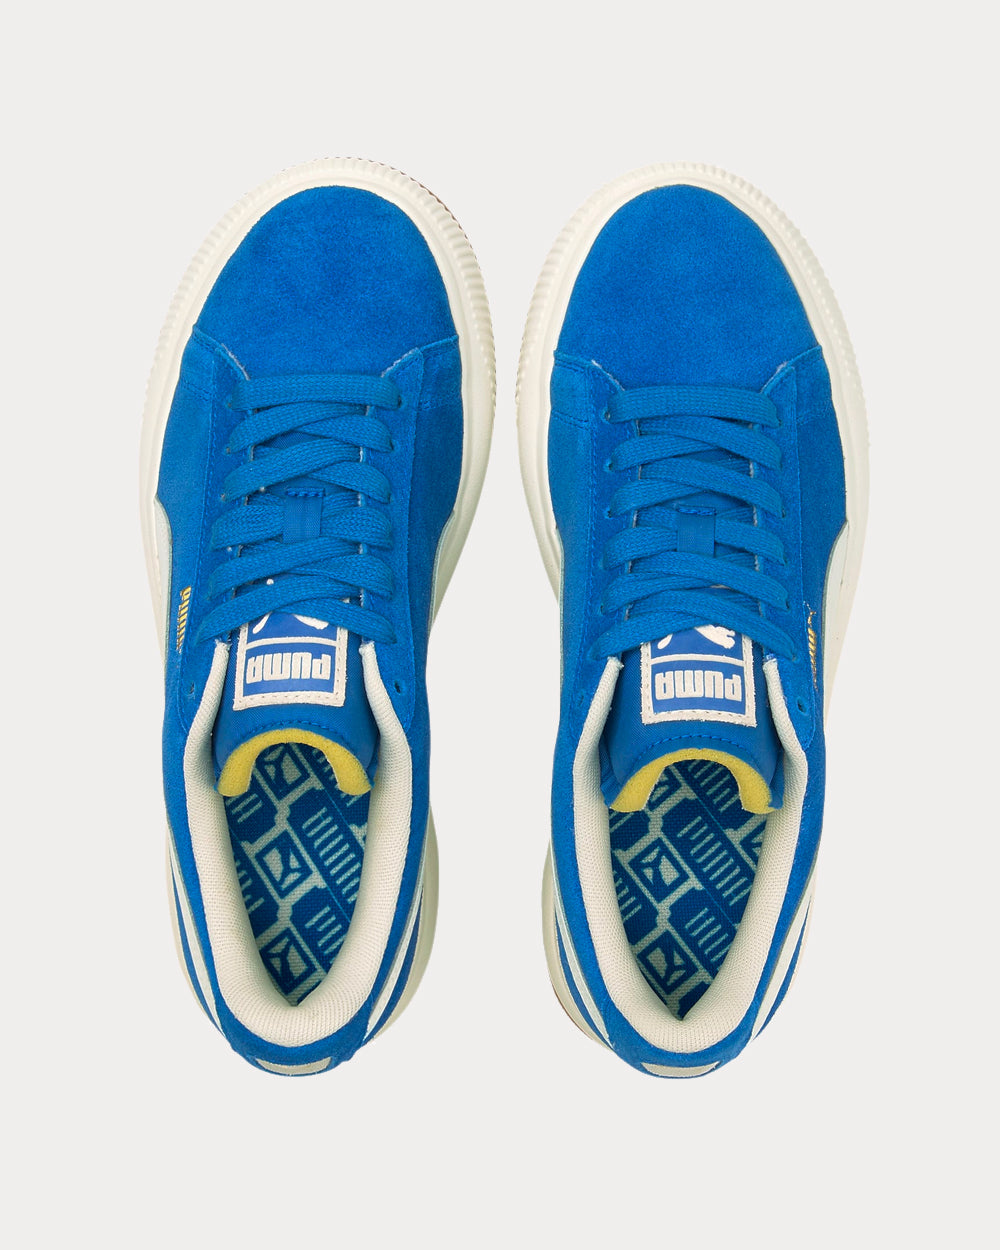 Puma - Mayu UP Blue Low Top Sneakers